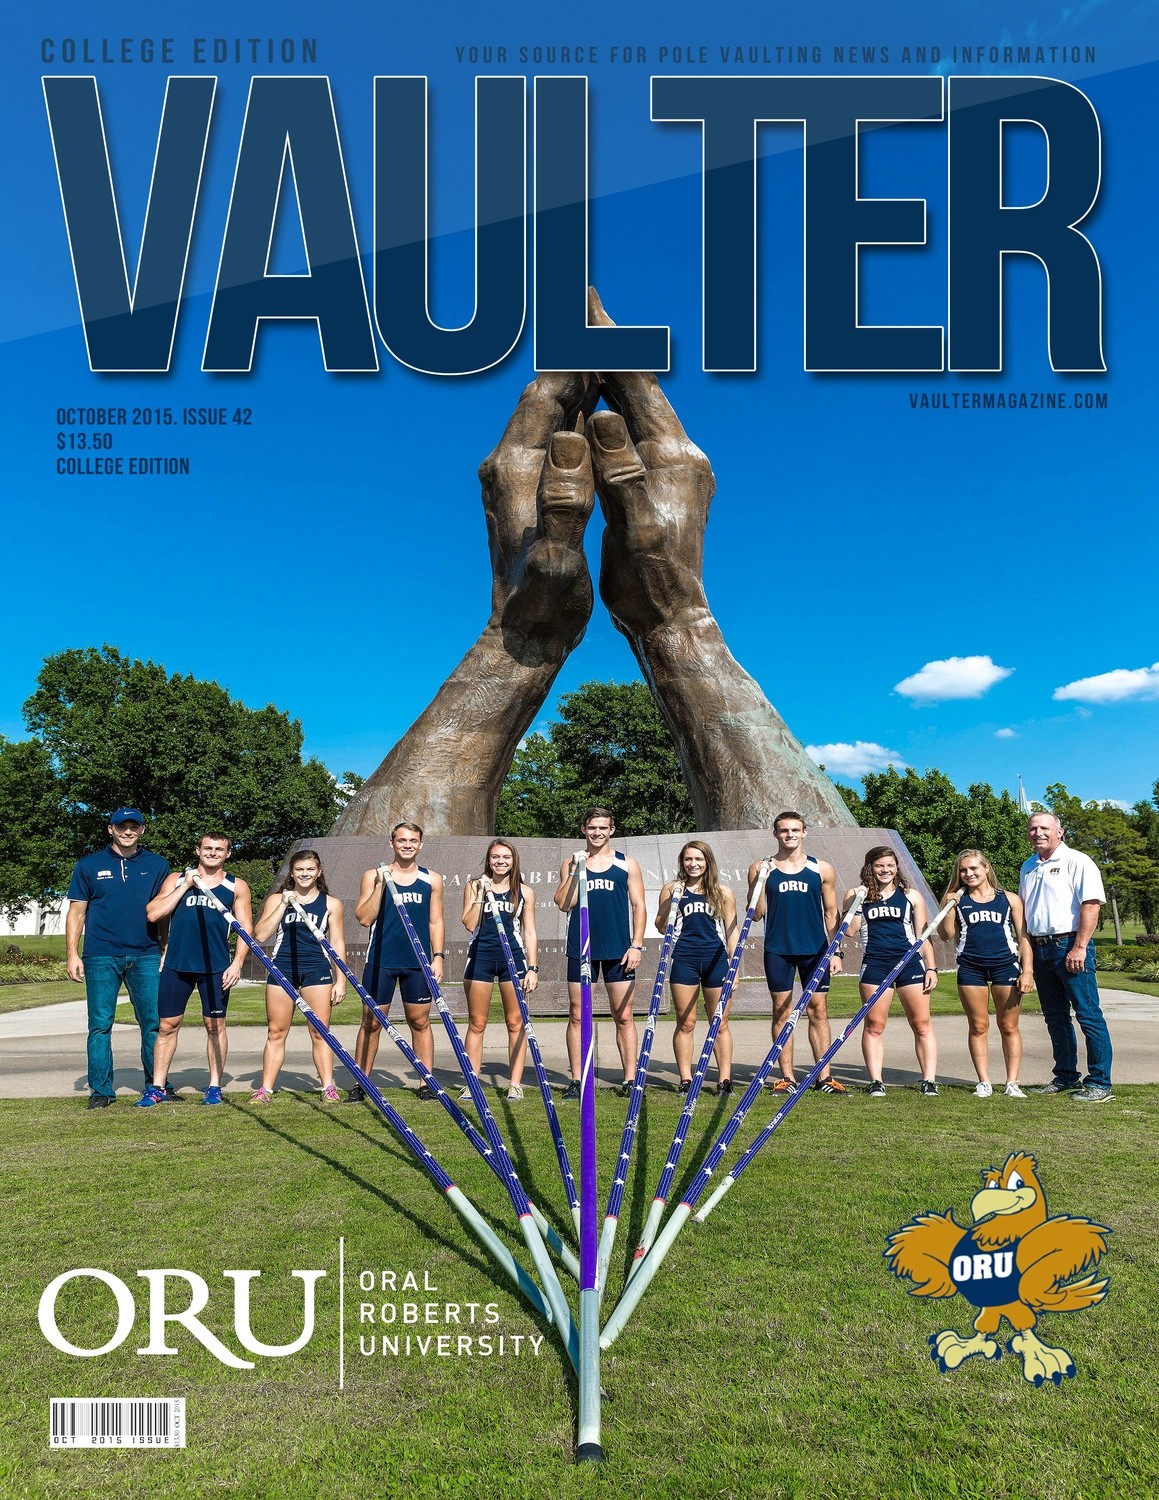 October 2015 Oral Roberts University Issue of VAULTER Magazine USPS First Class 